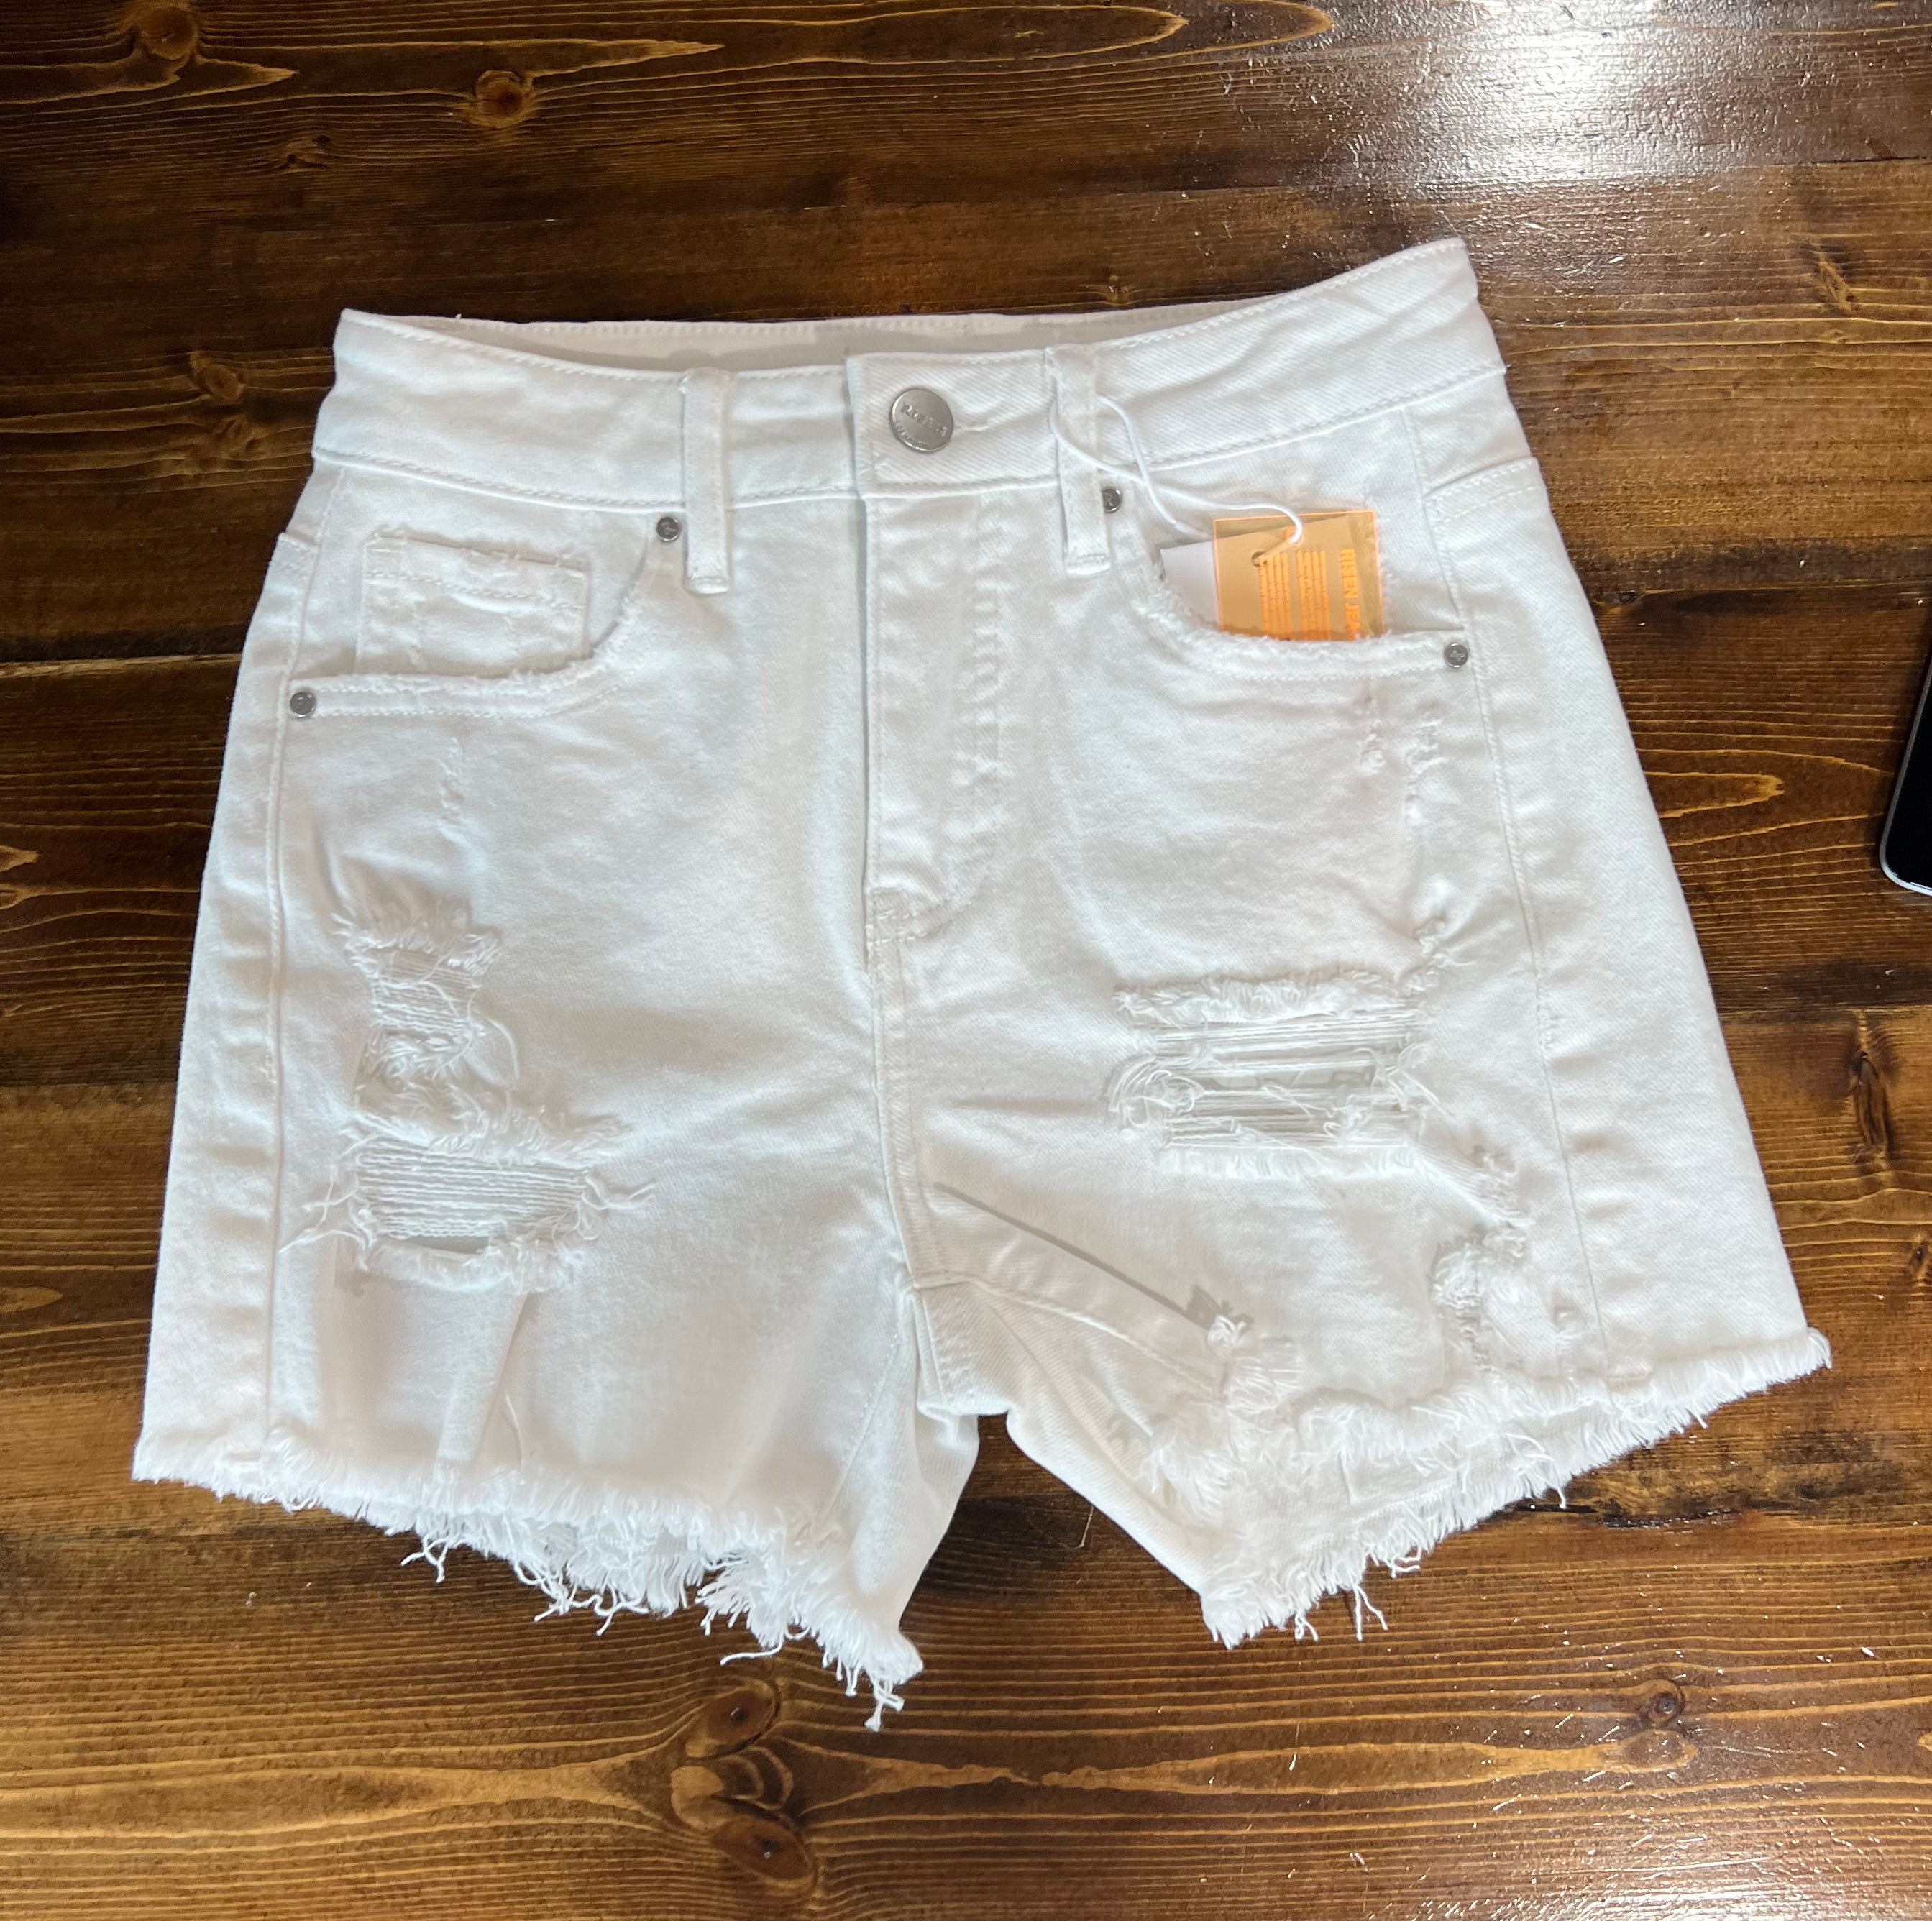 White Distressed Shorts